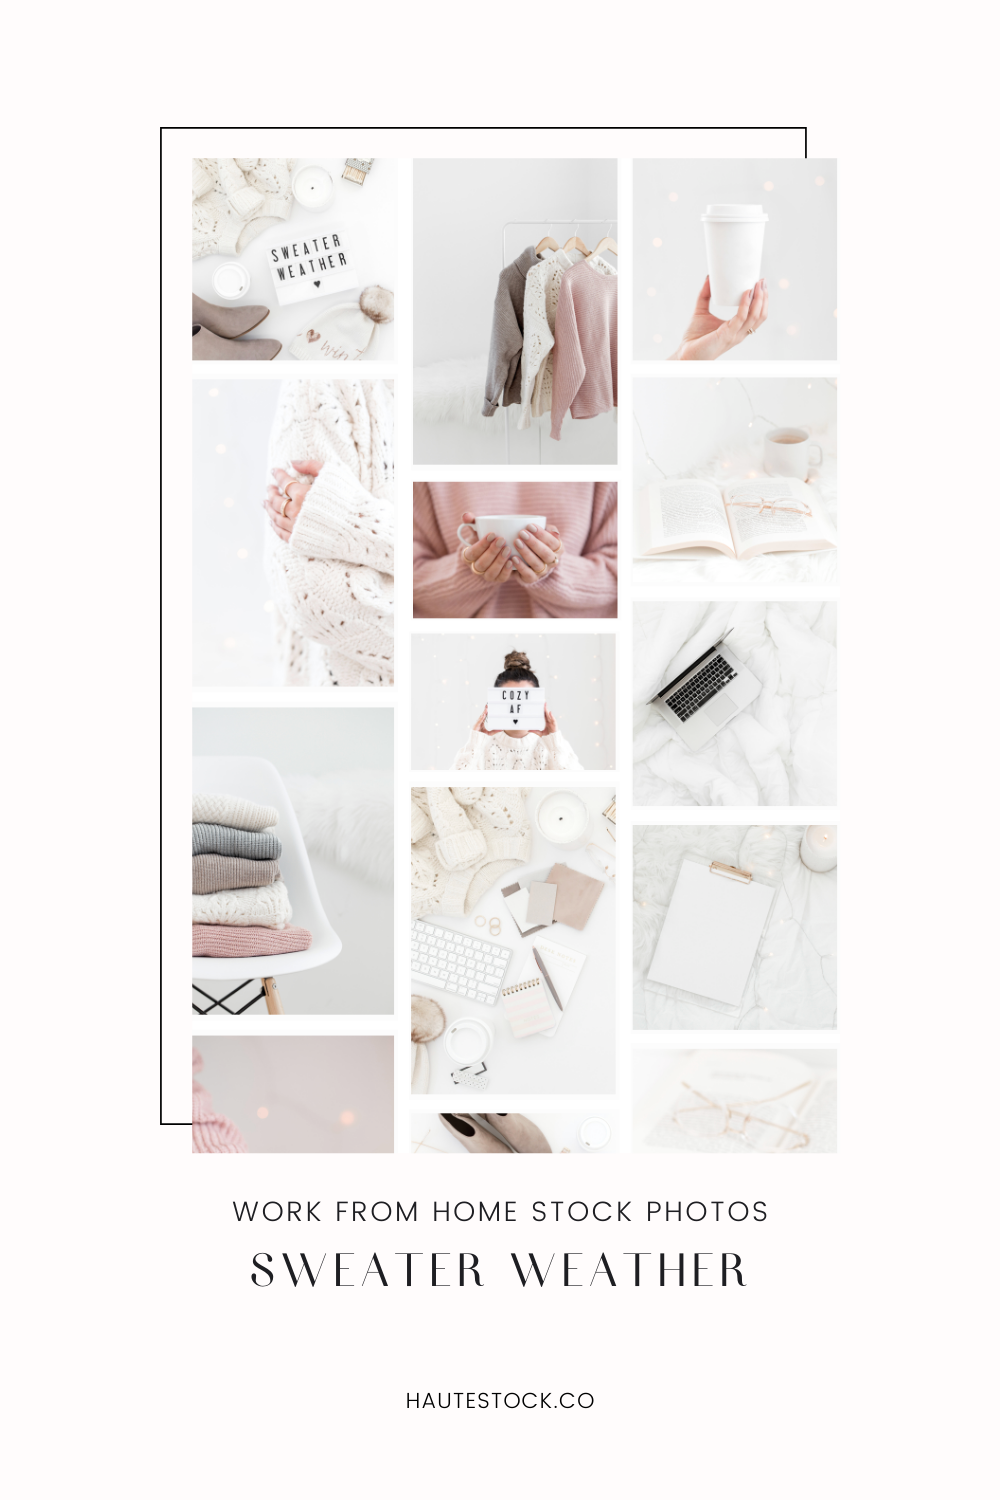 White and blush work from home stock photos for female entrepreneurs